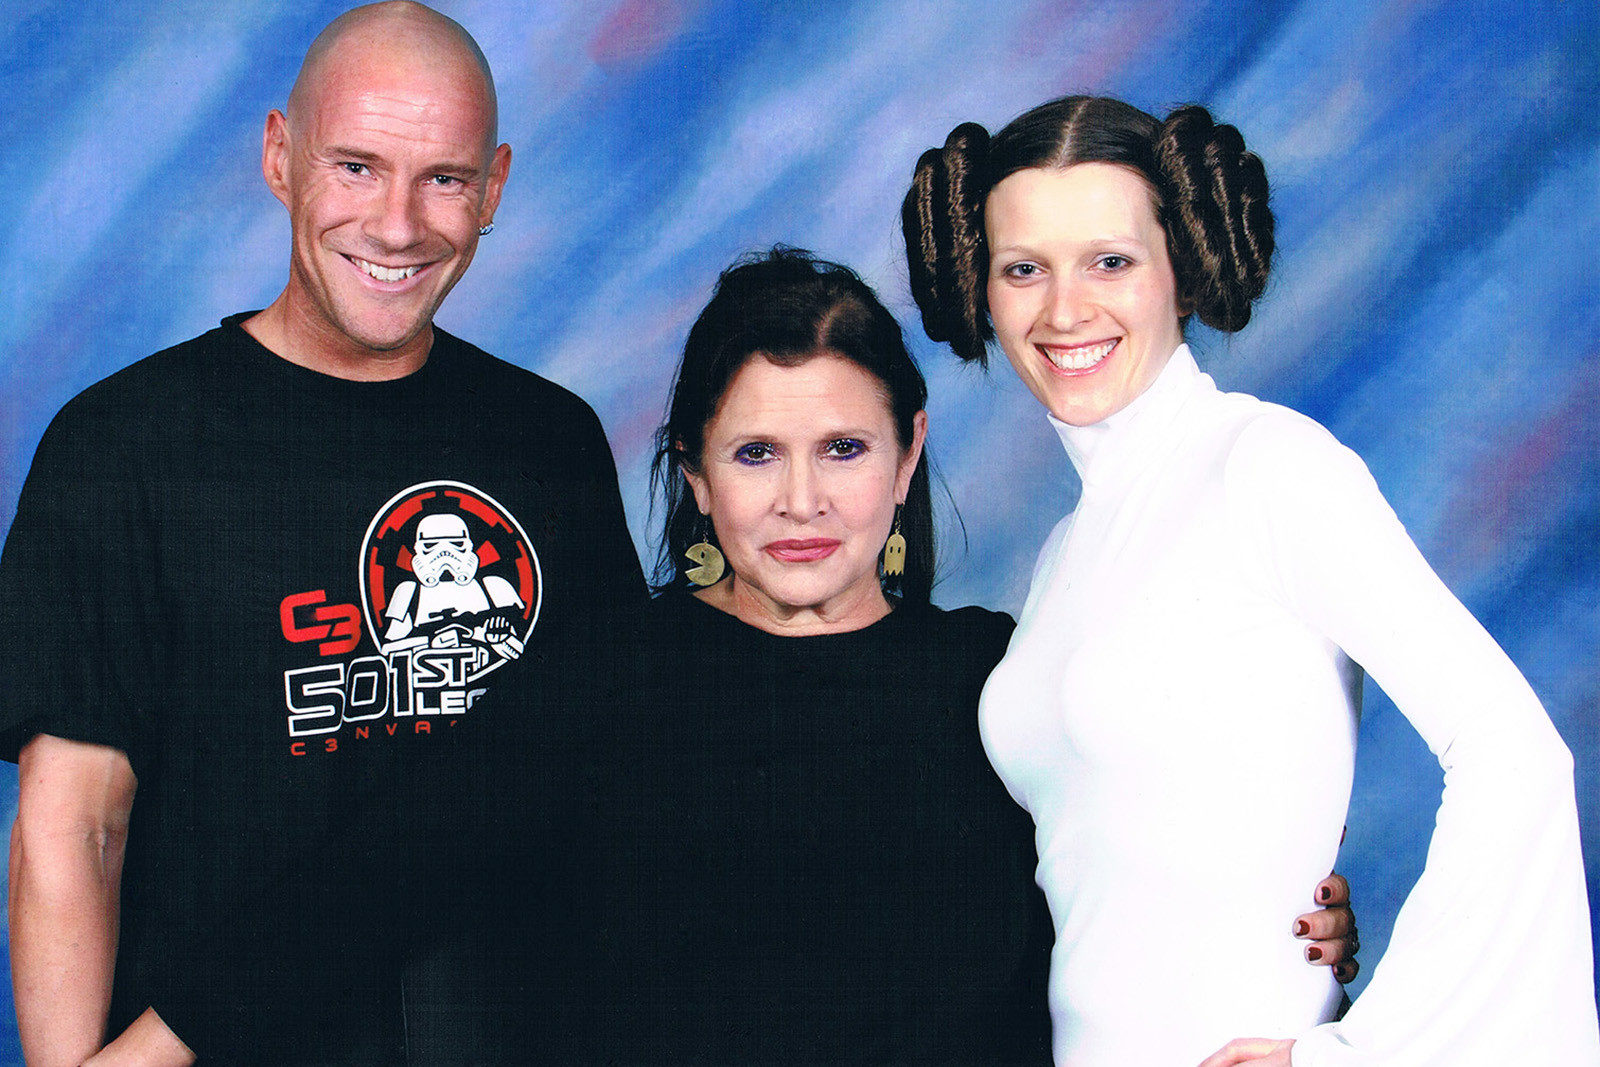 Meeting Carrie Fisher at DragonCon 2011